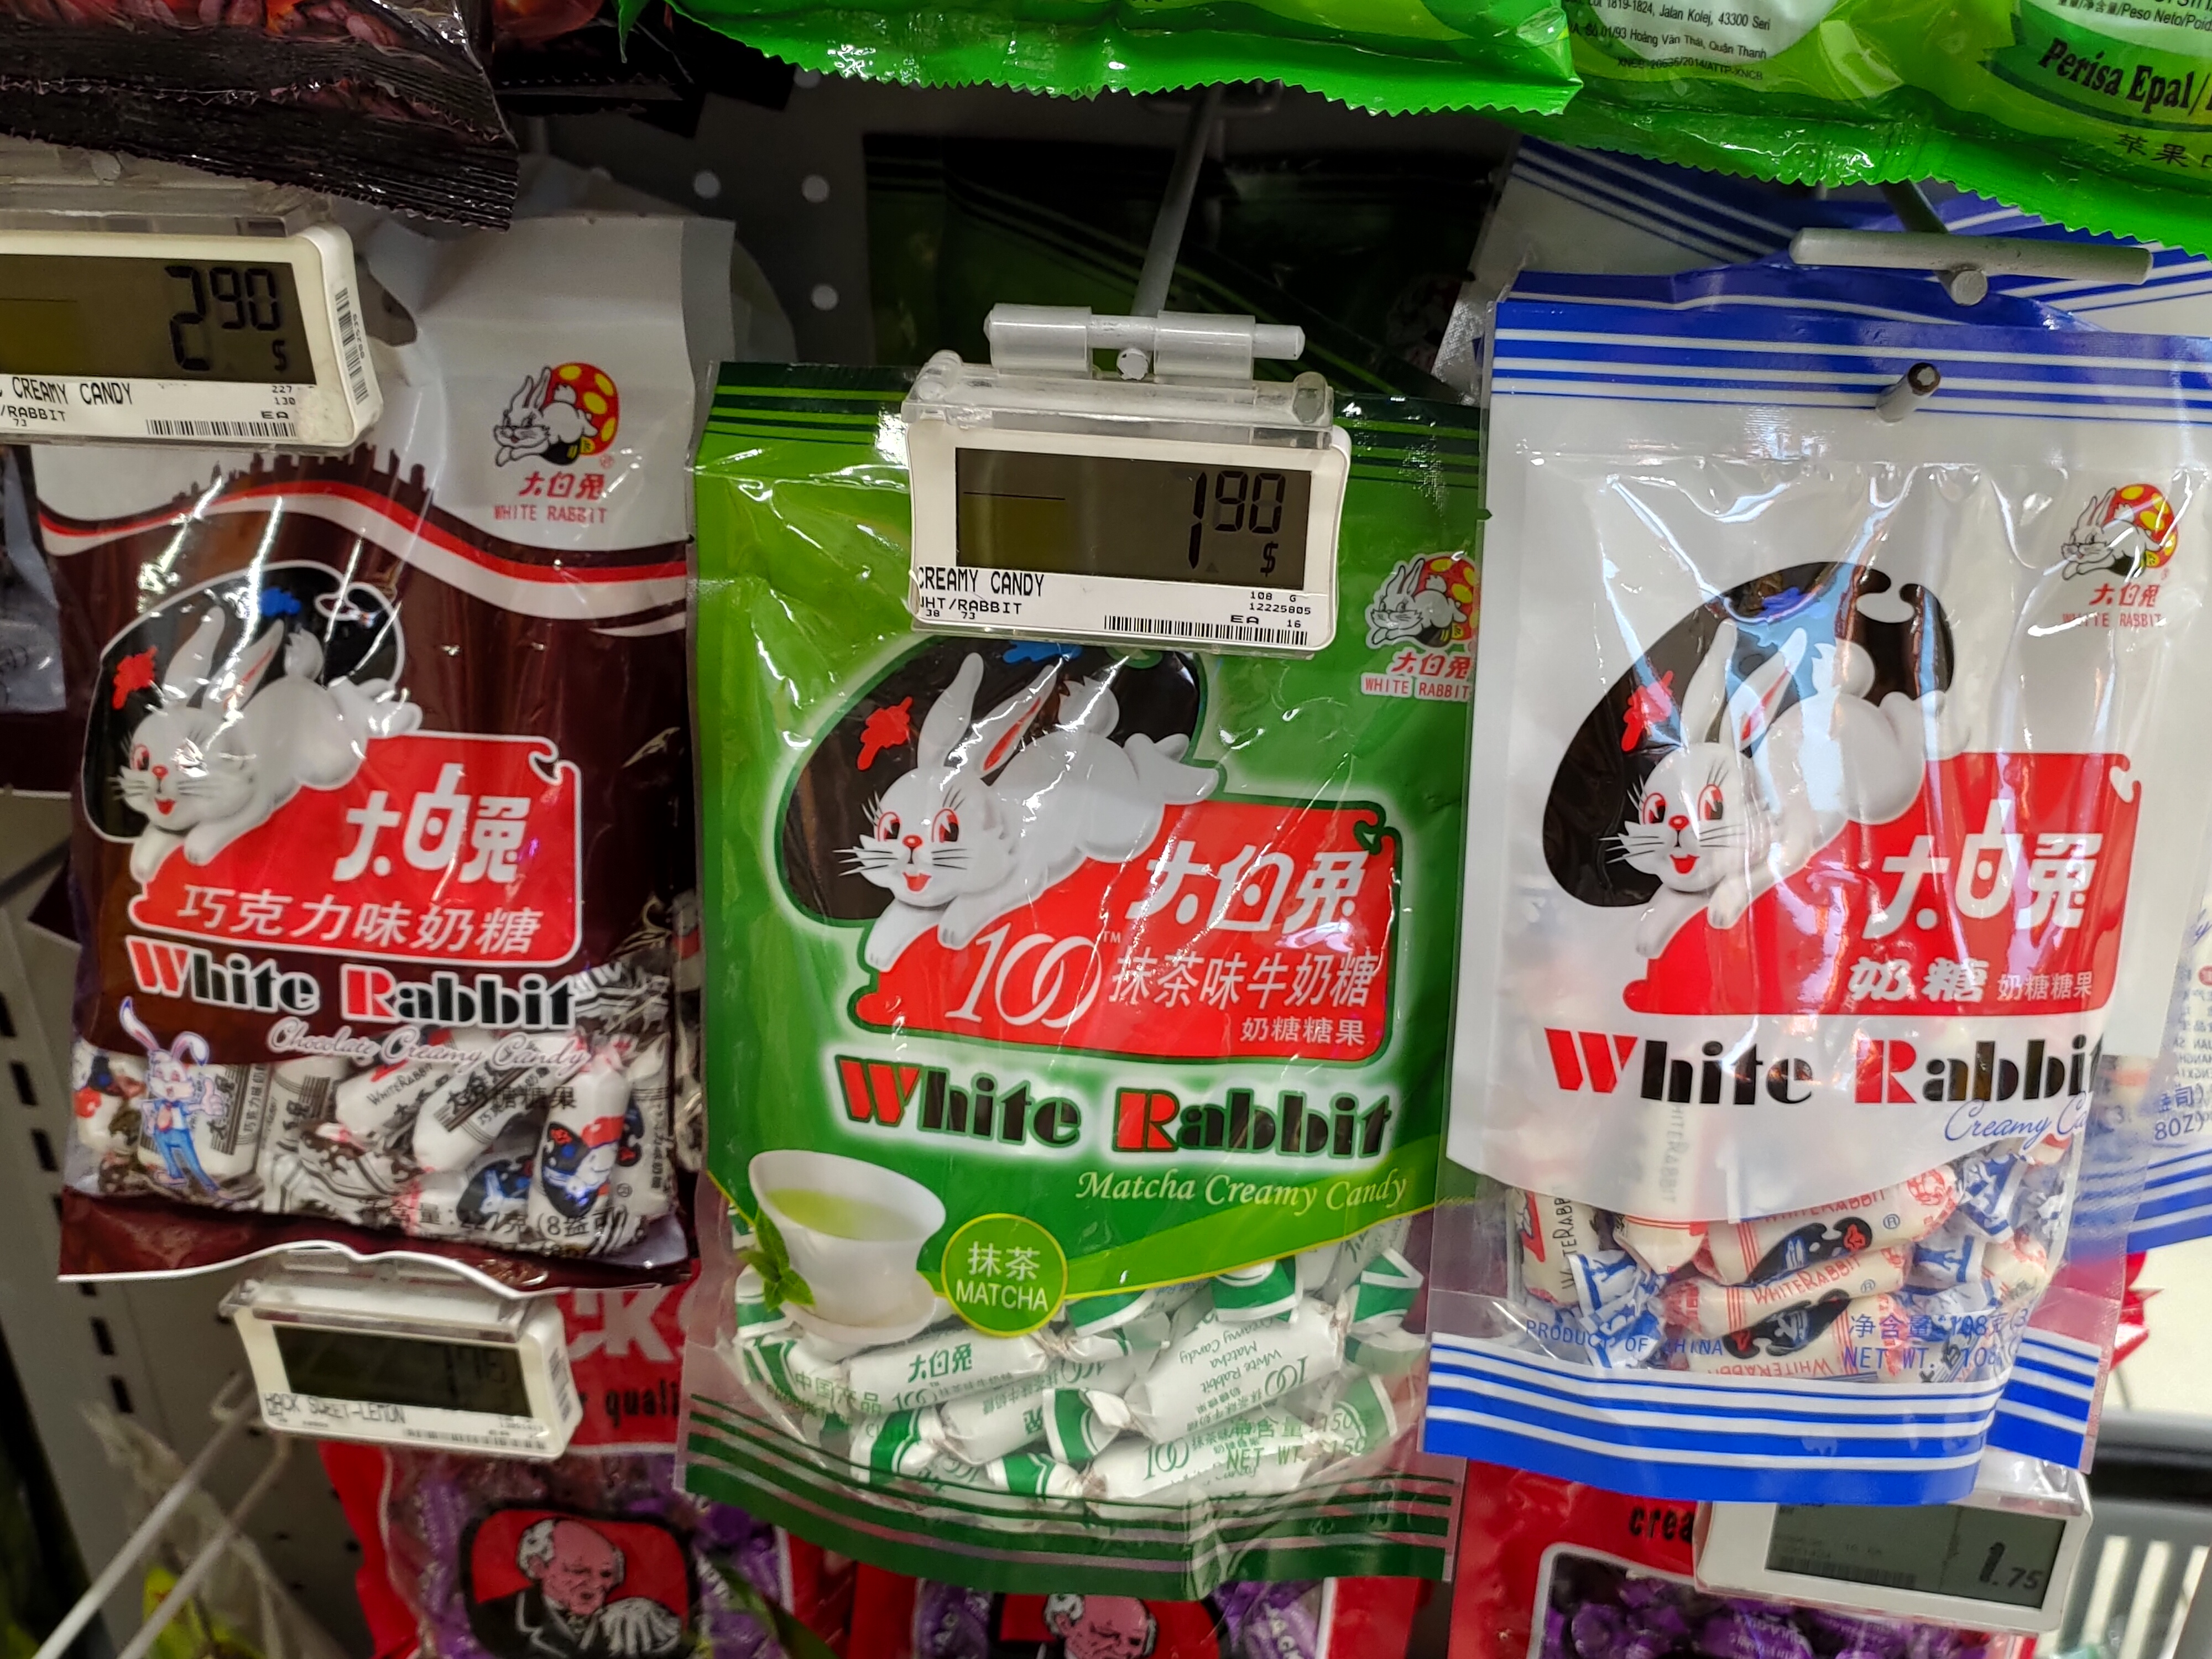 White Rabbit Candy now available in Matcha and Chocolate flavours, and can be found at selected FairPrice - 1